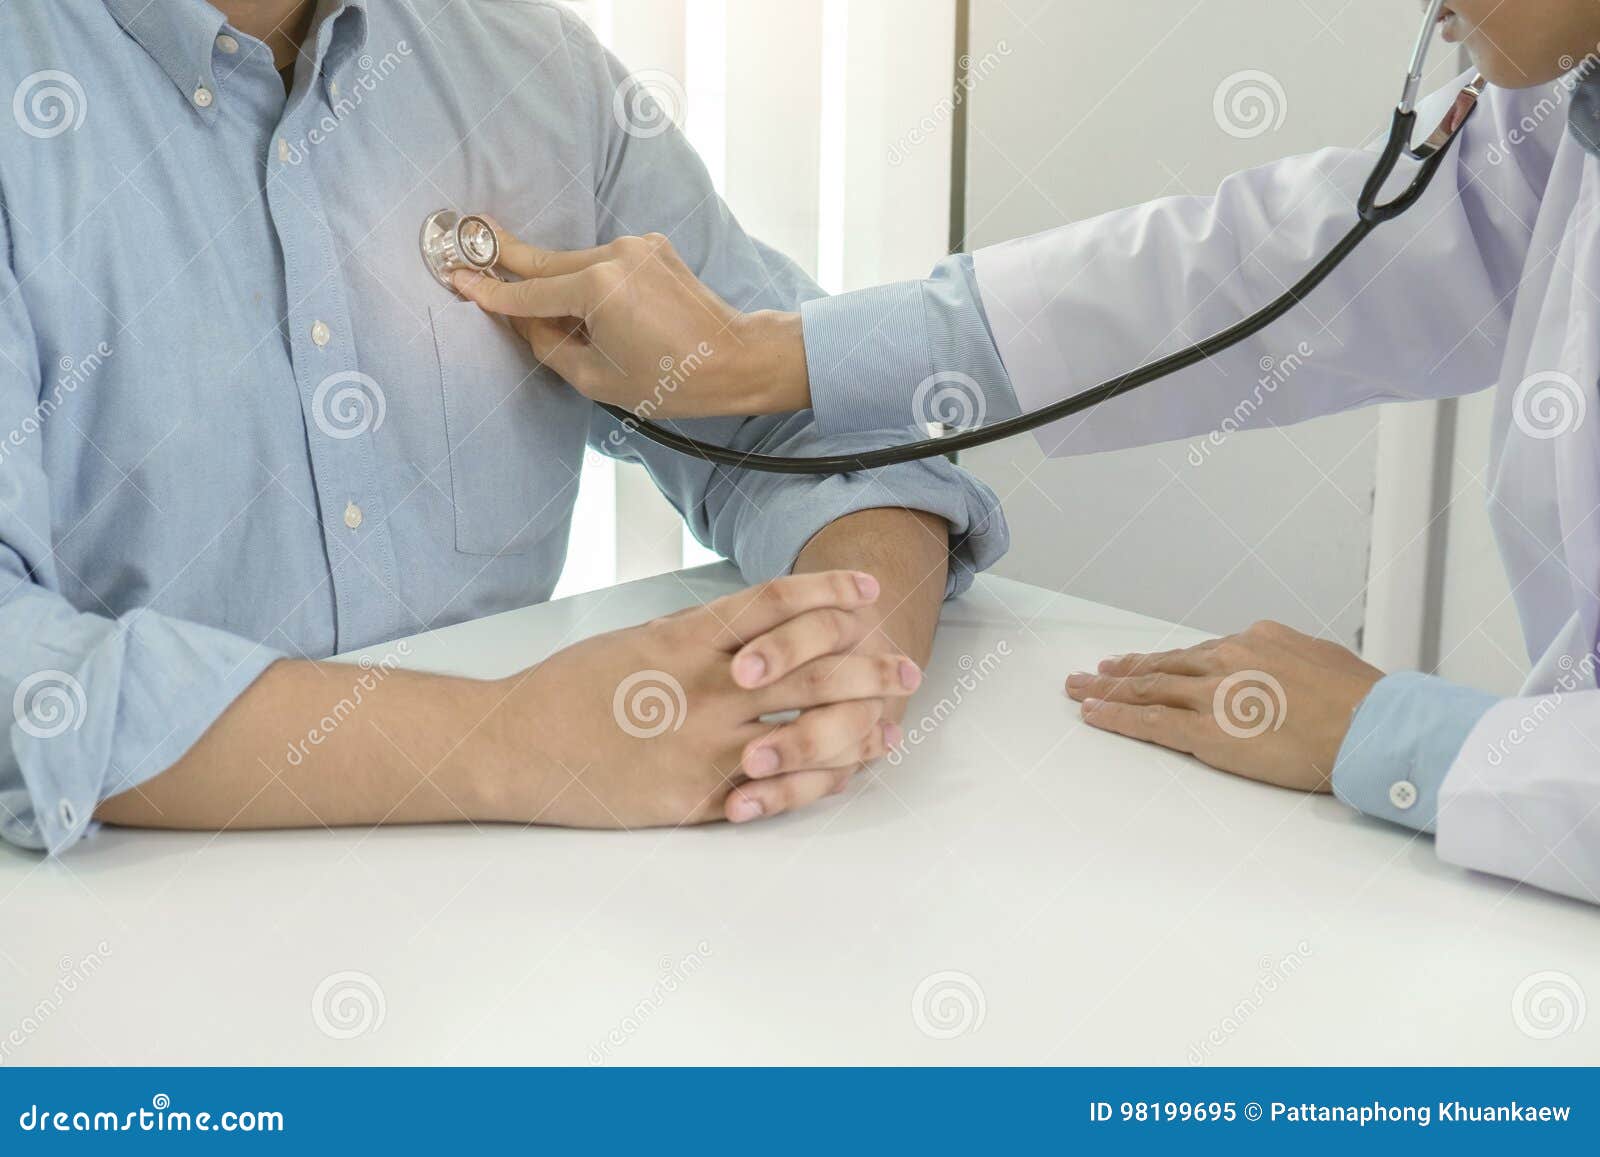 Close Up Of Doctor Listening To Patient Heartbeat With Stethoscope On Hospital Physical